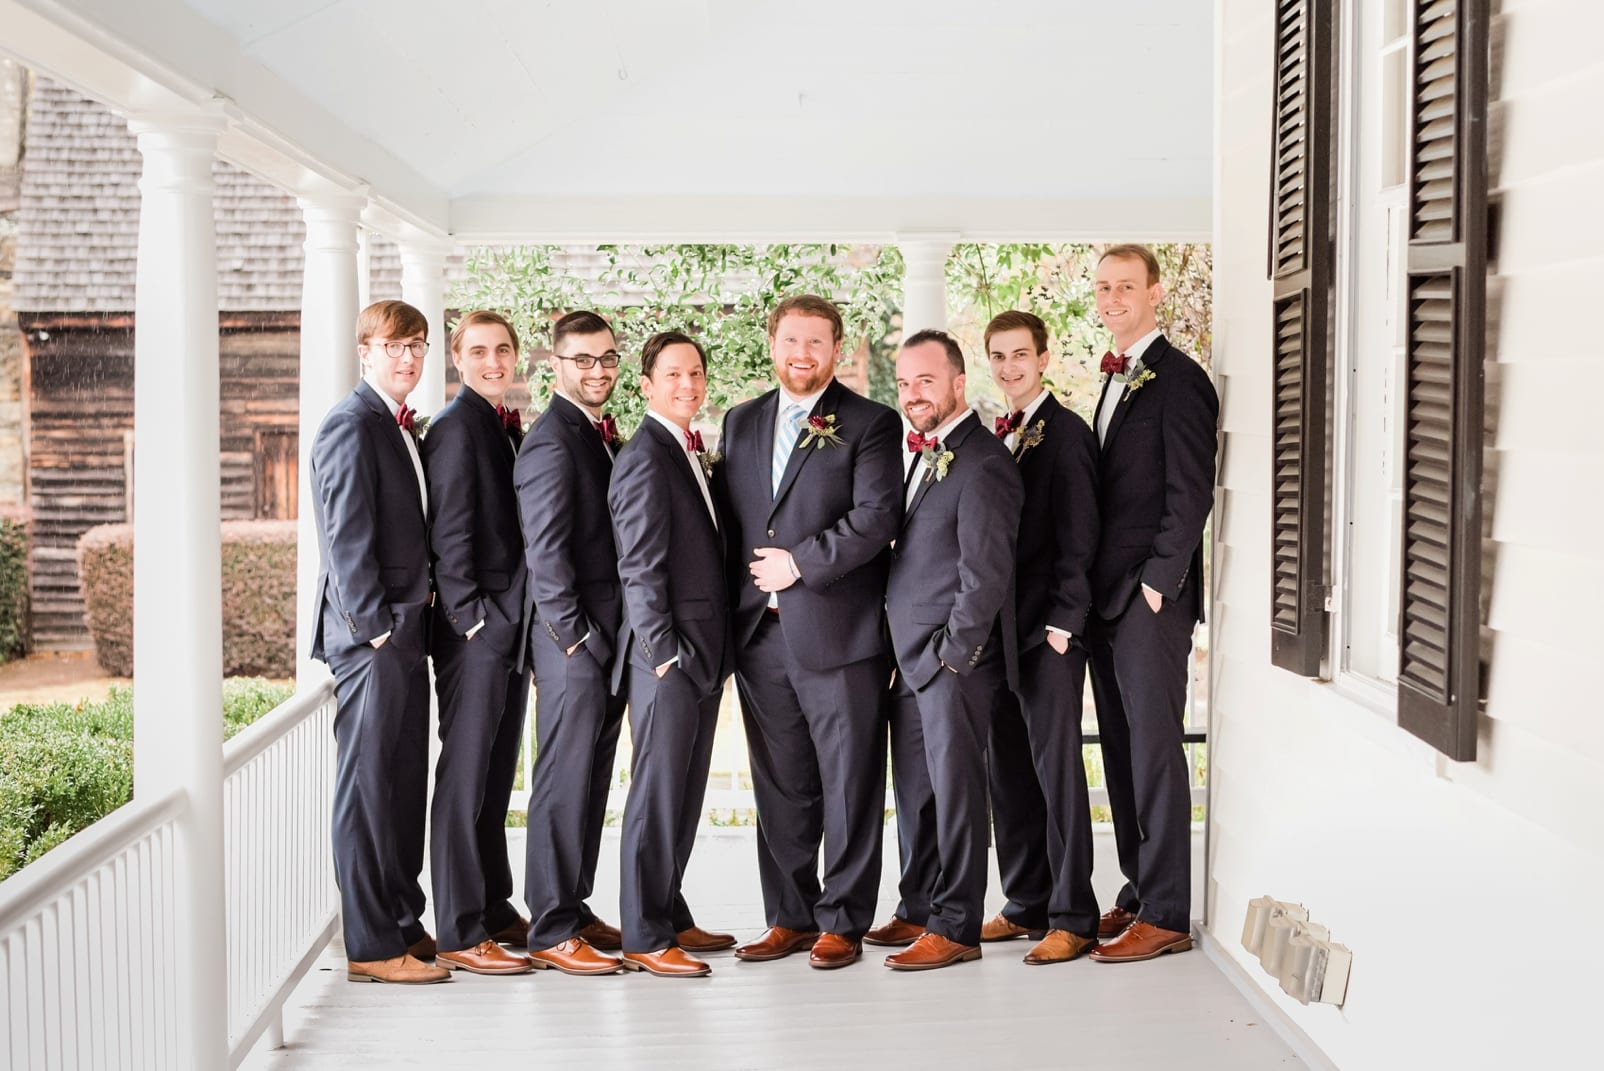 Sutherland Estate groom and groomsmen in black Jos A. Banks suits with light brown shoes photo